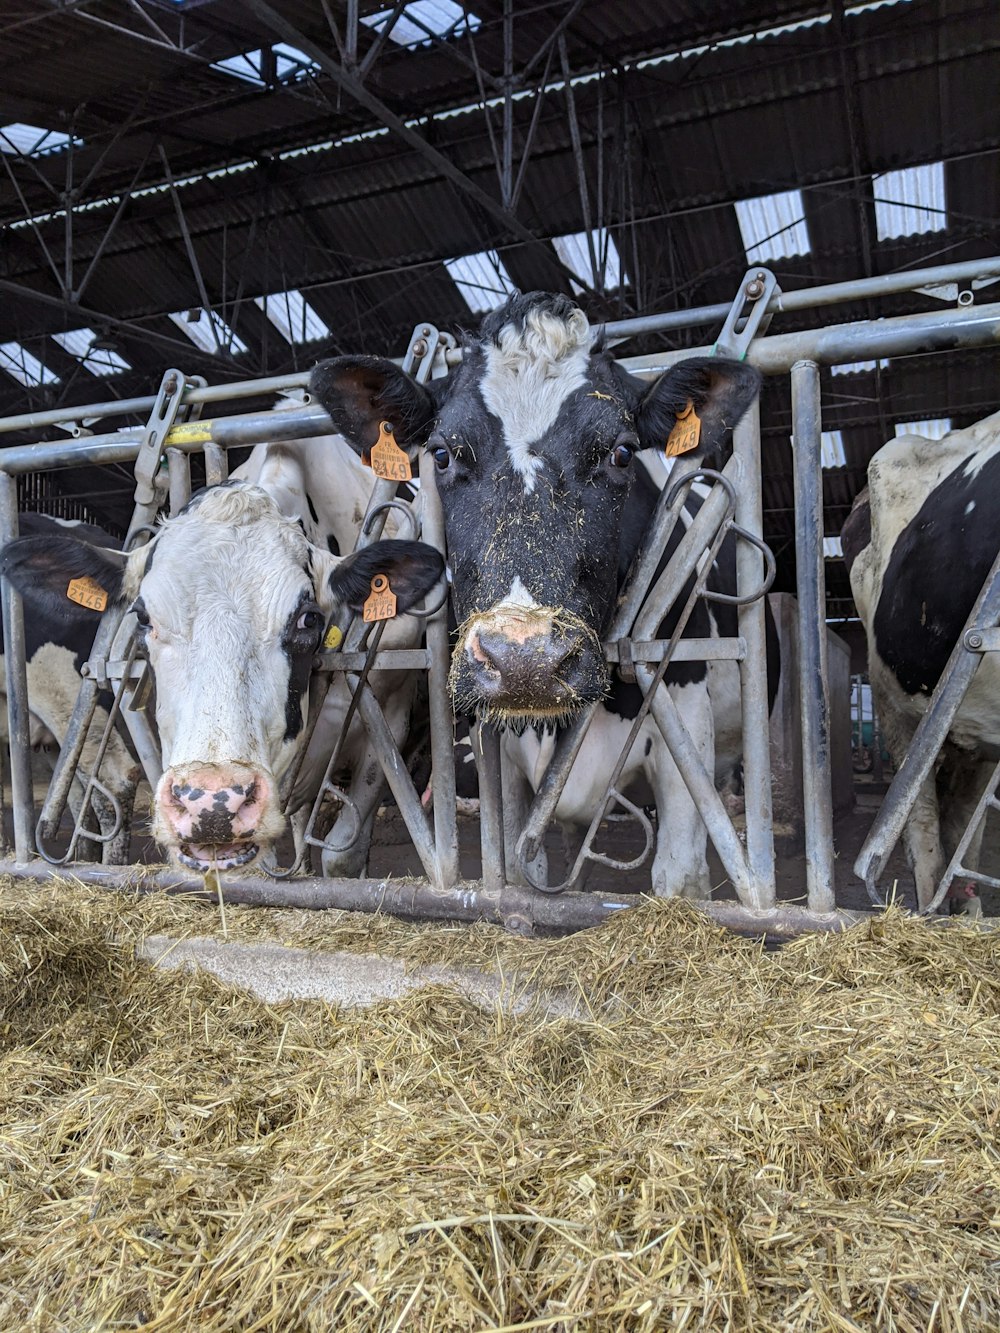 a group of cows are standing in a barn